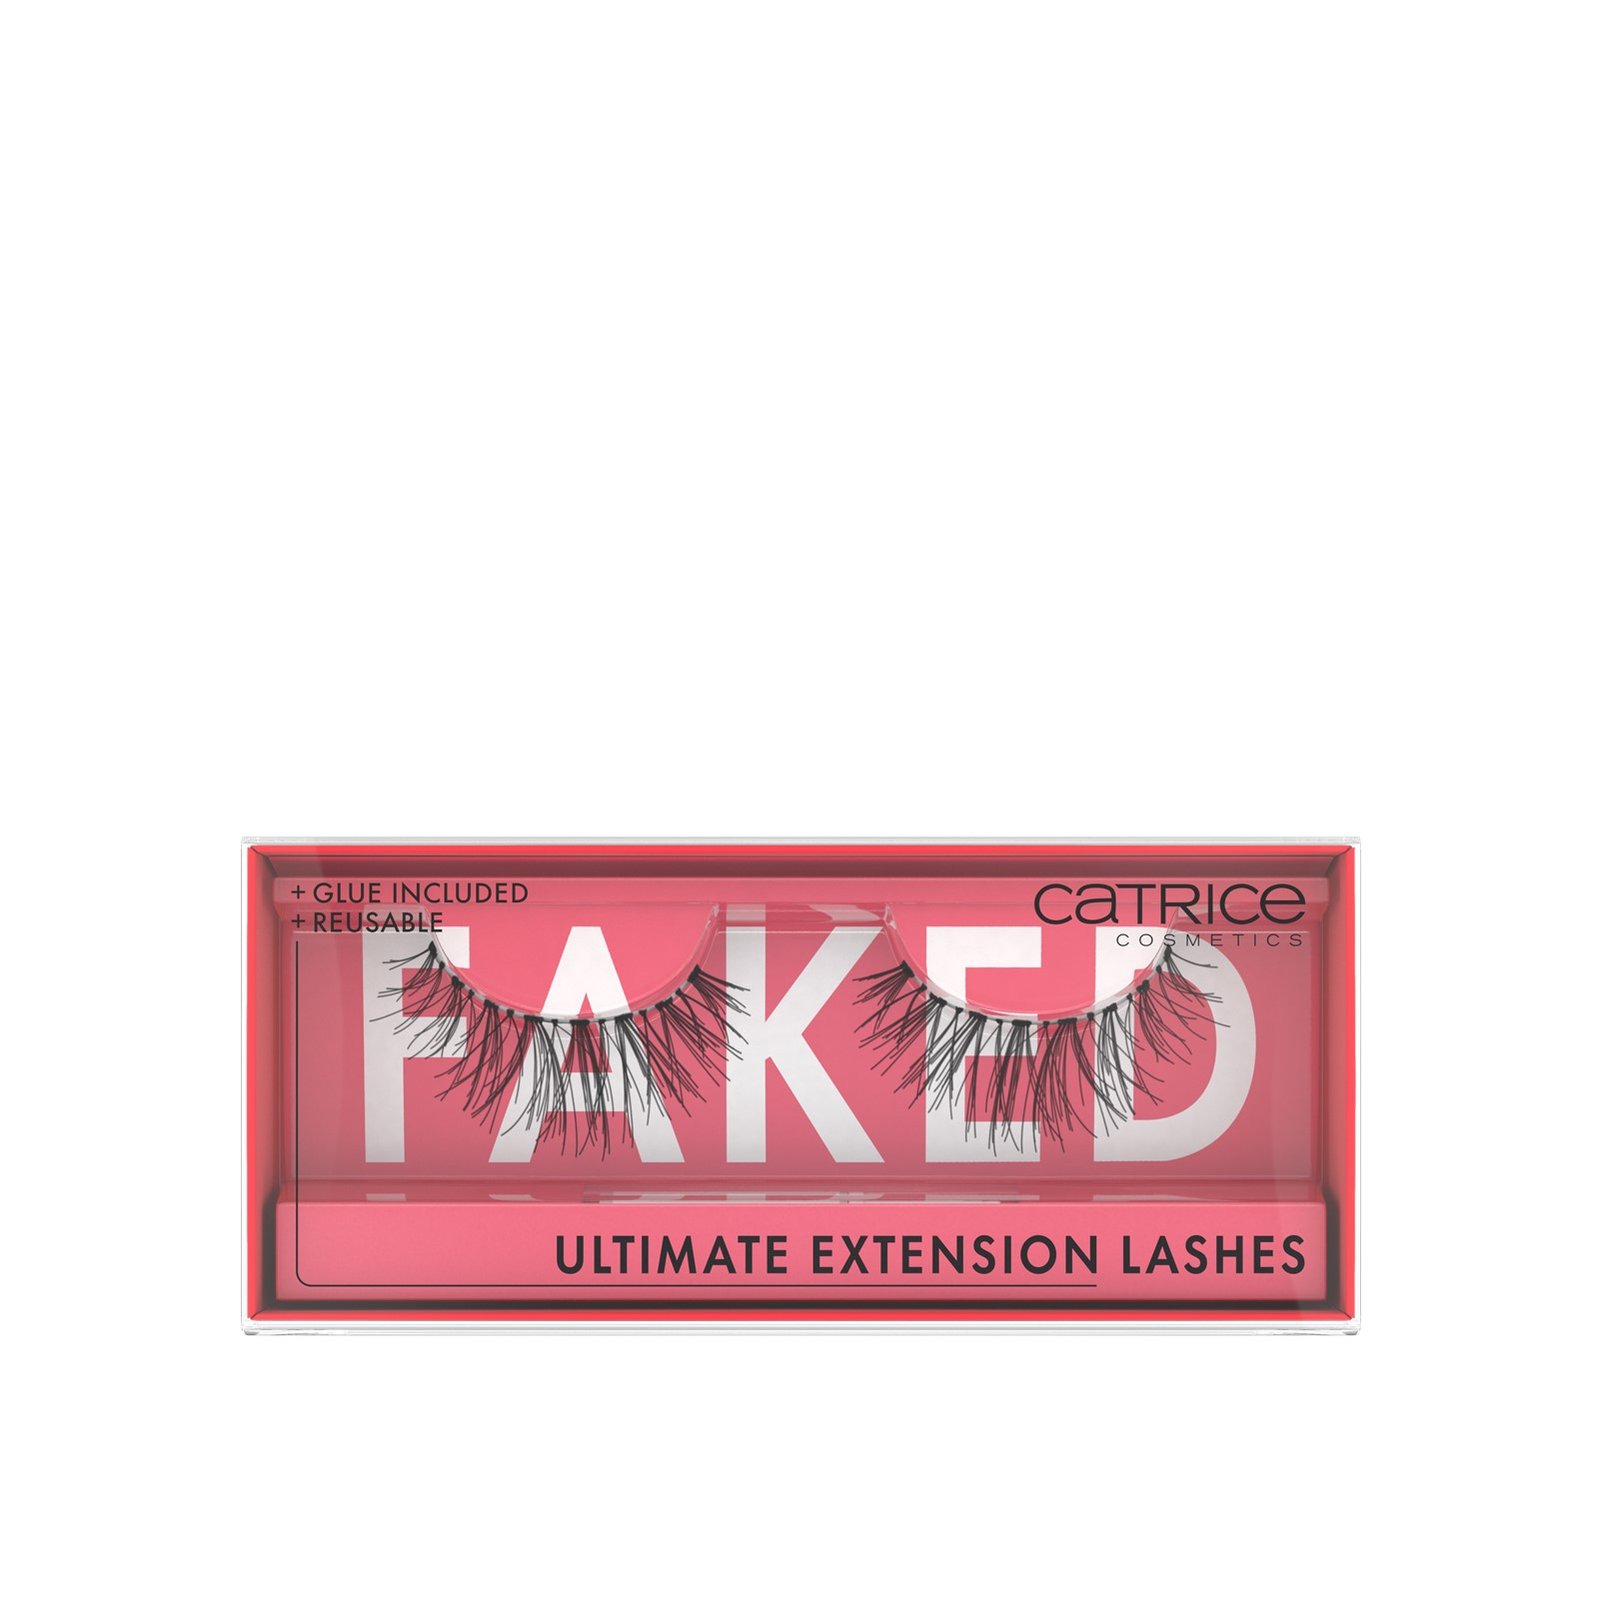 Catrice Faked Ultimate Extension Lashes x1 Pair